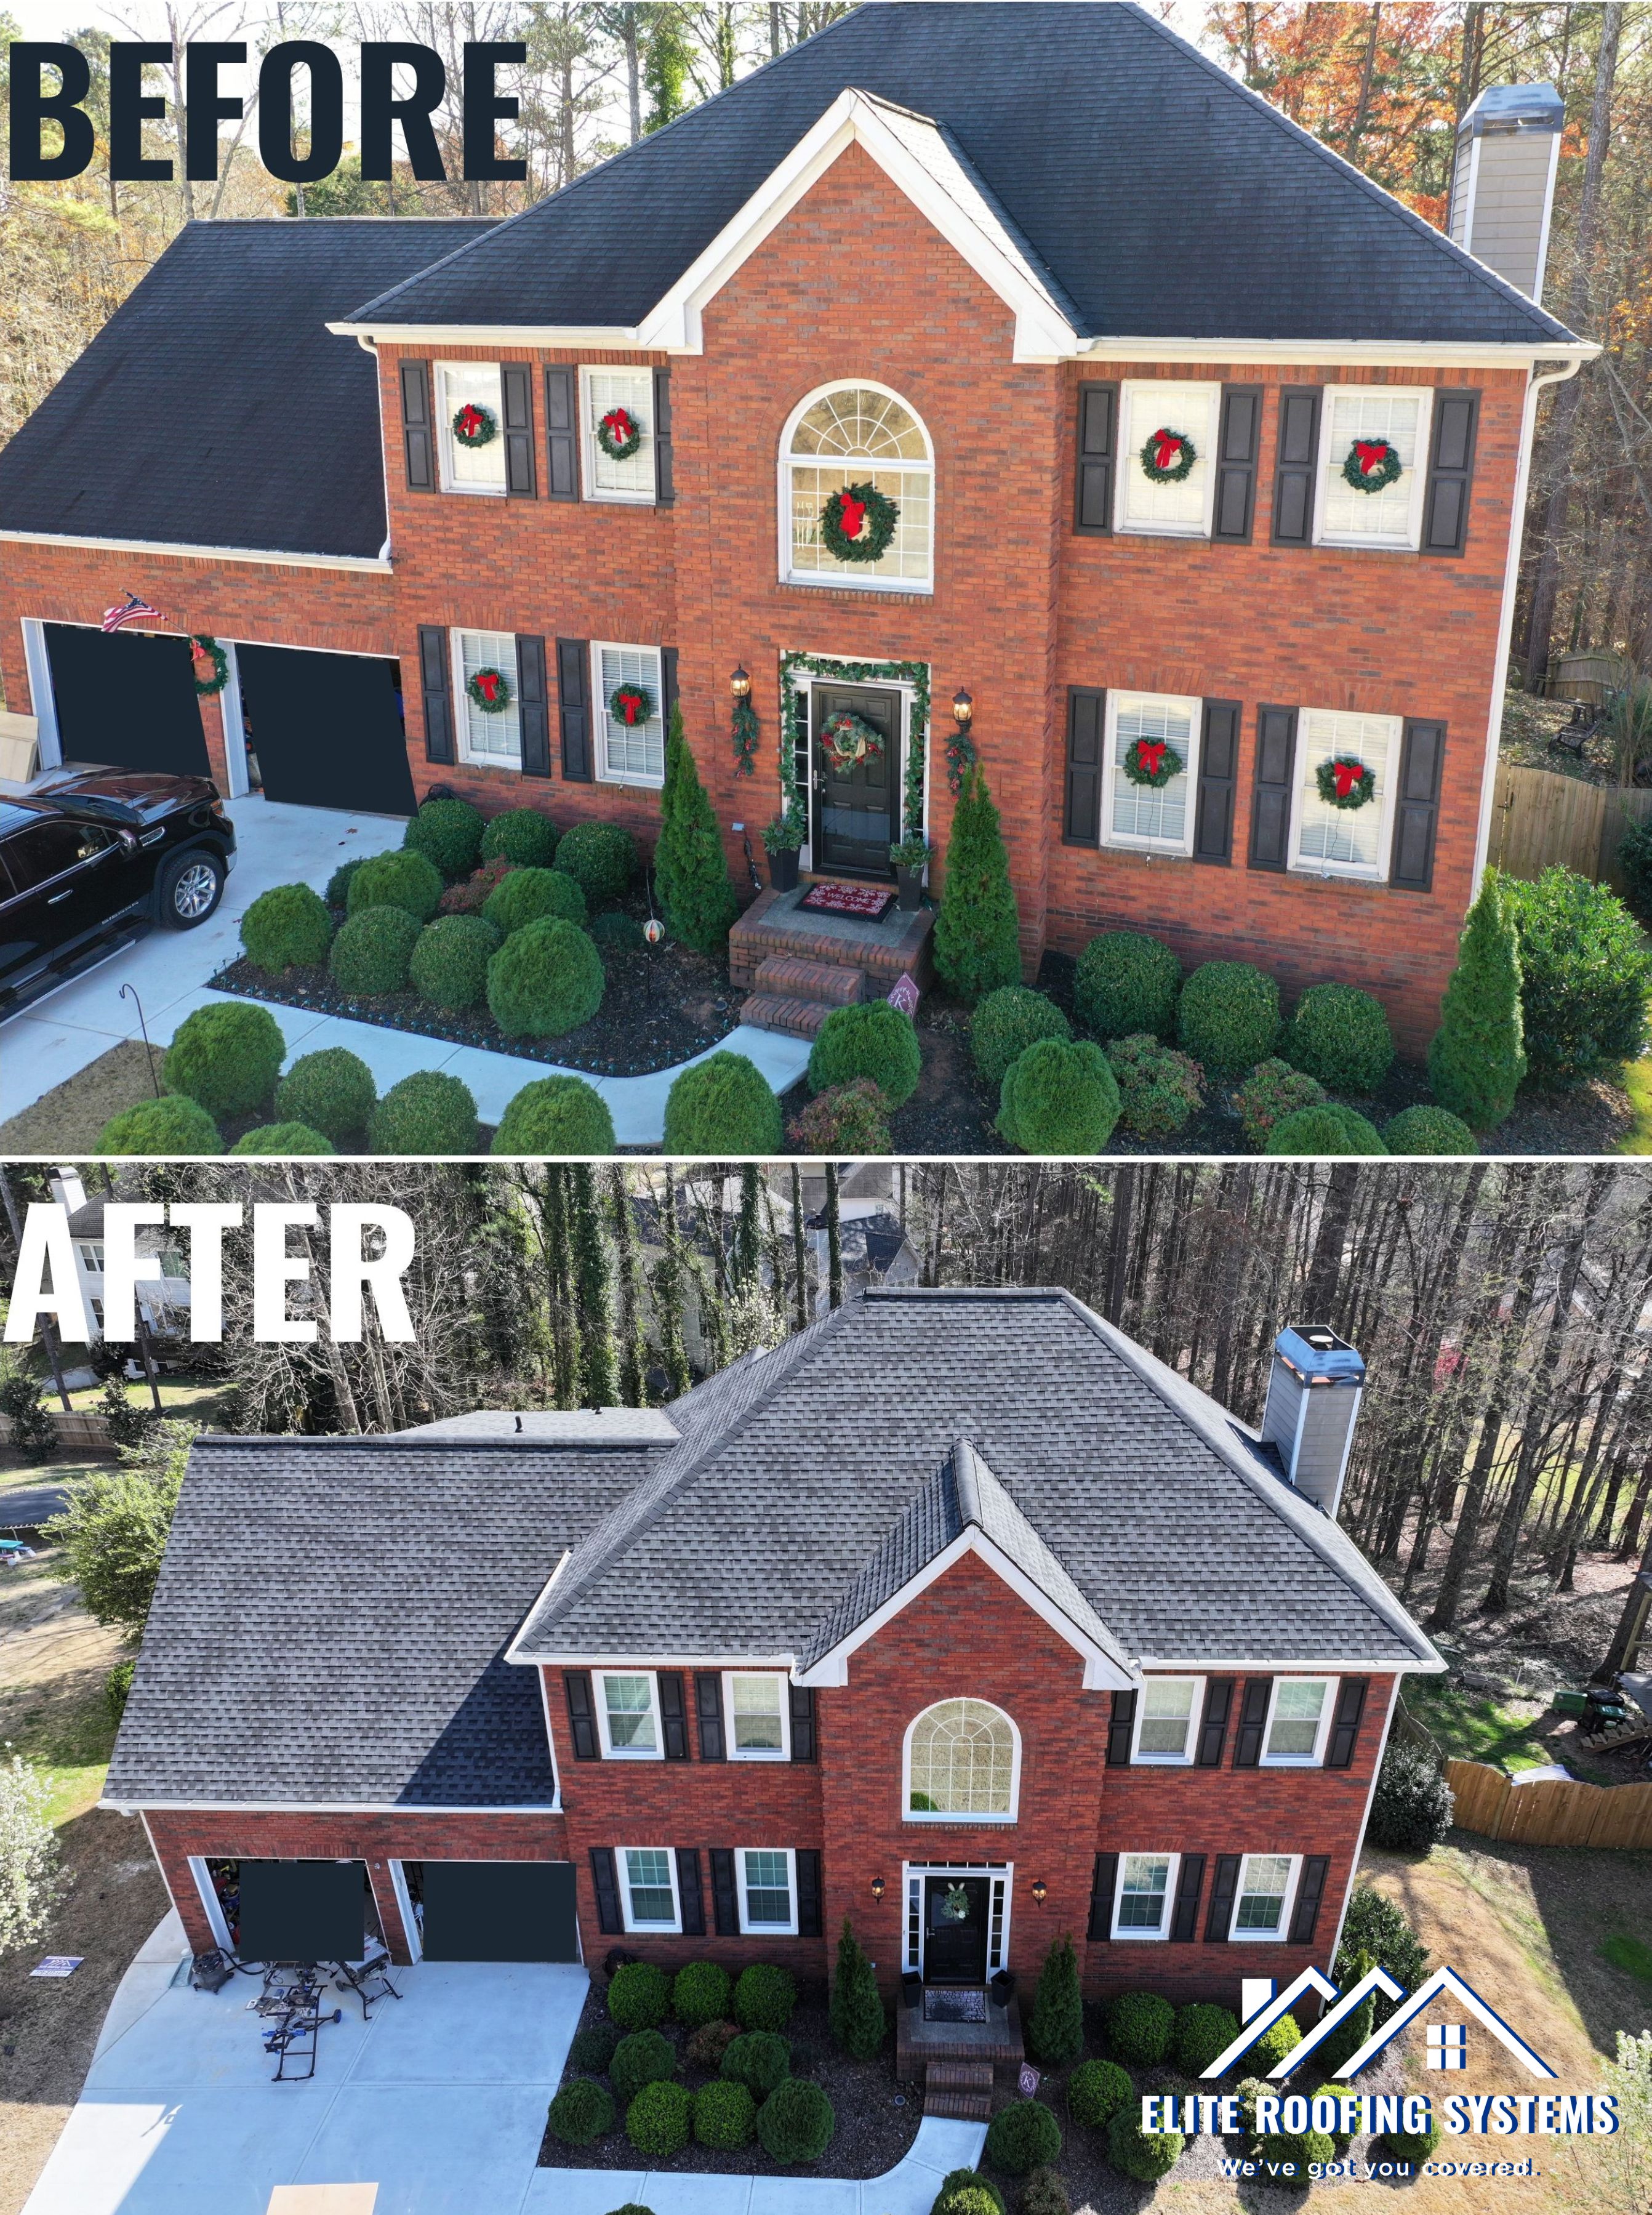 Remarkable Roof Replacement Transformation in Roswell, Georgia